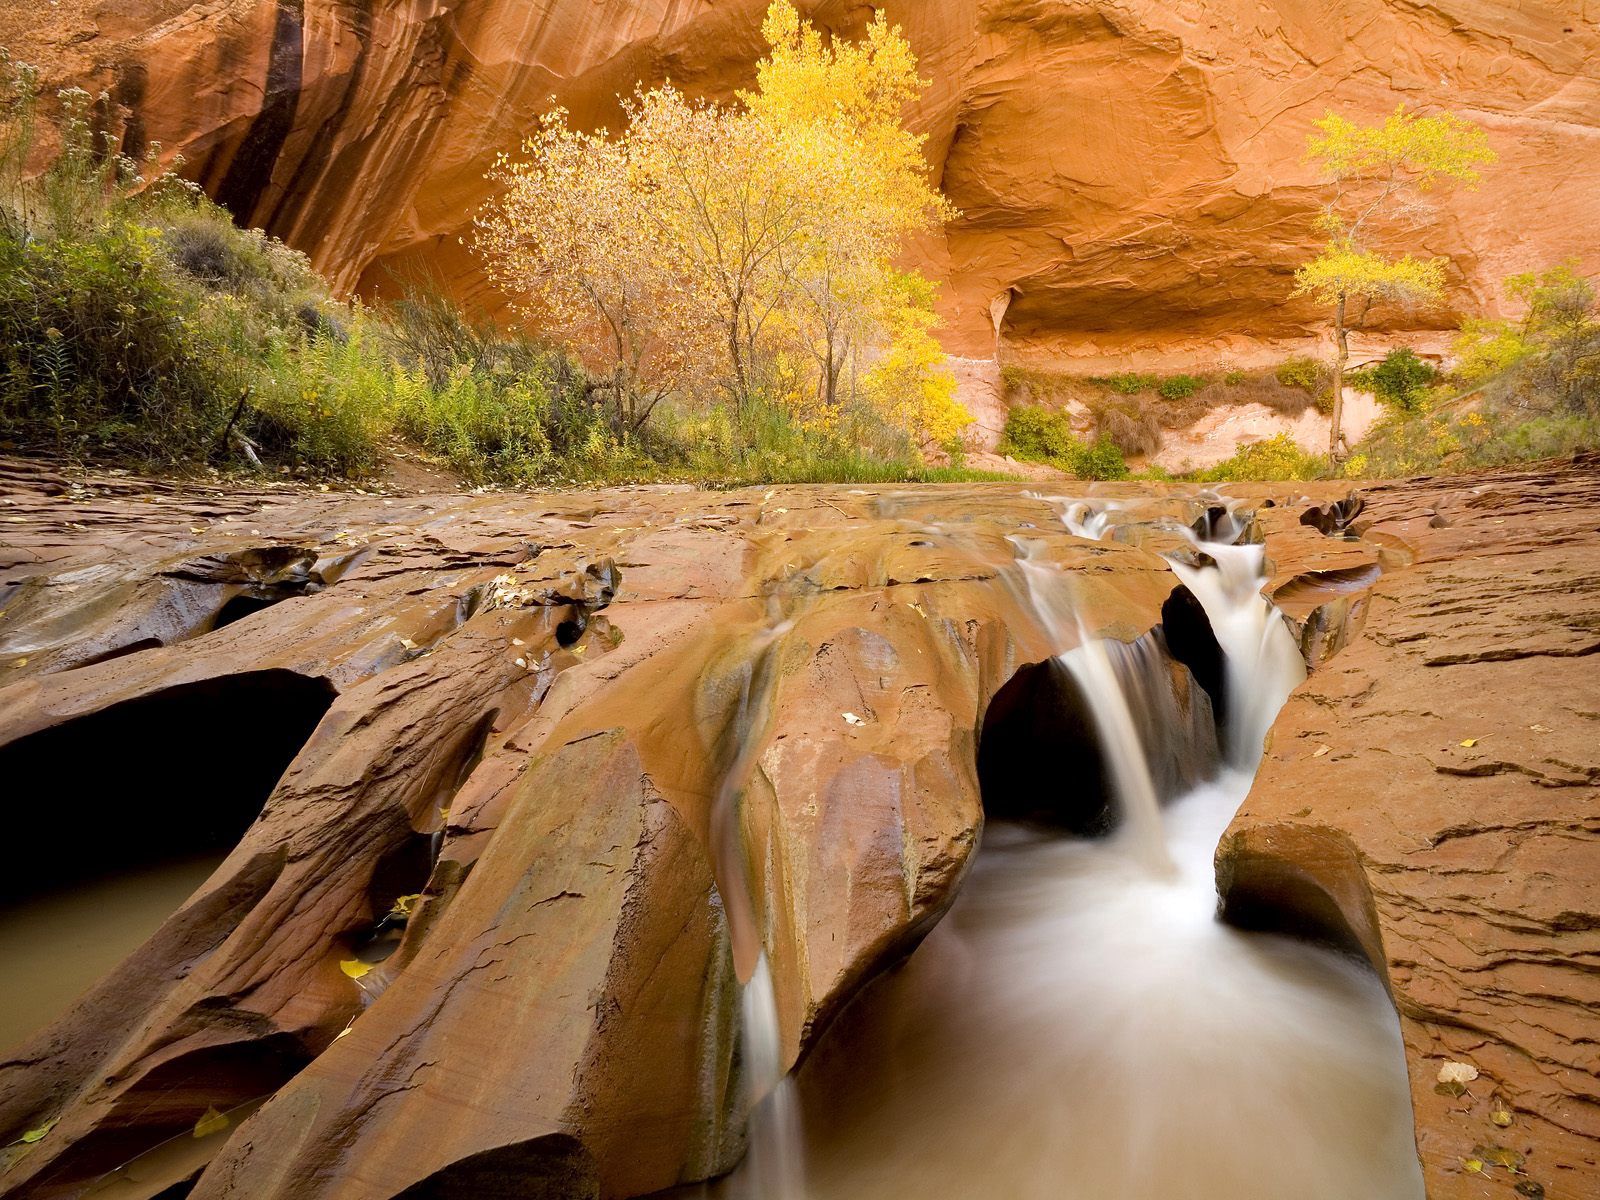 154064 download wallpaper nature, water, trees, stones, canyon, vegetation, flow, utah, stream, spearhead, prick screensavers and pictures for free